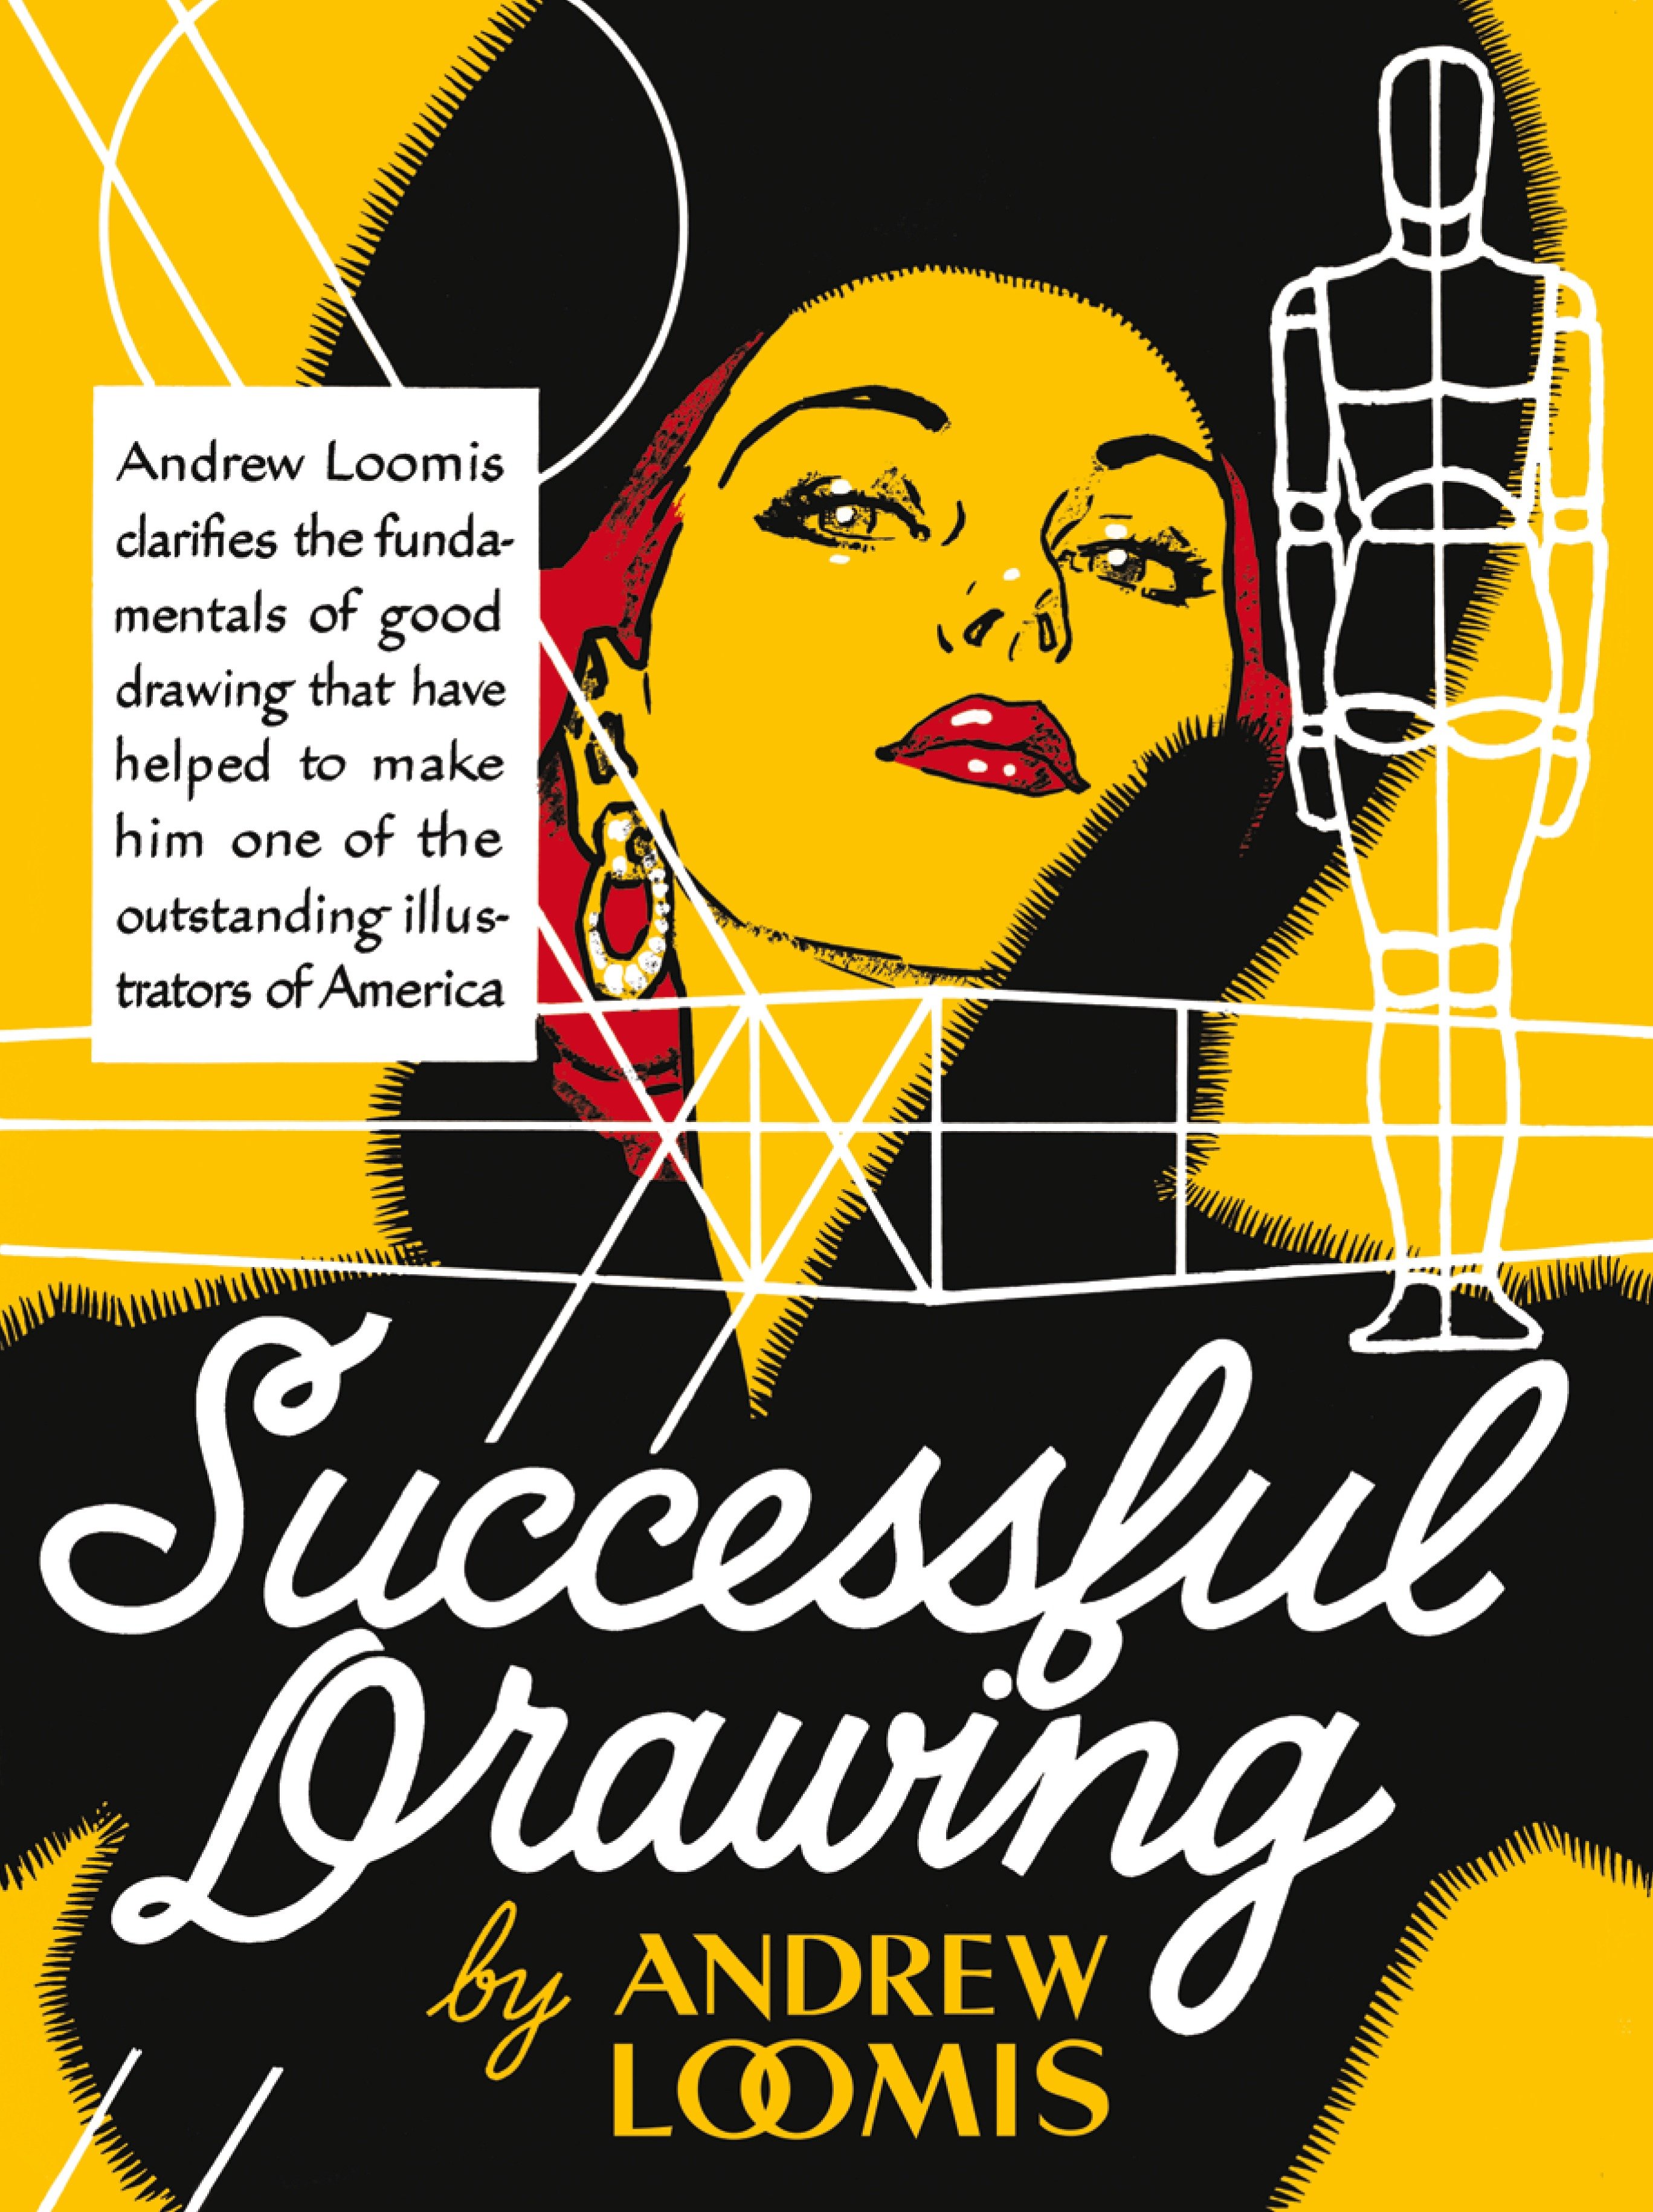 Andrew Loomis Succesful Drawing Hardcover